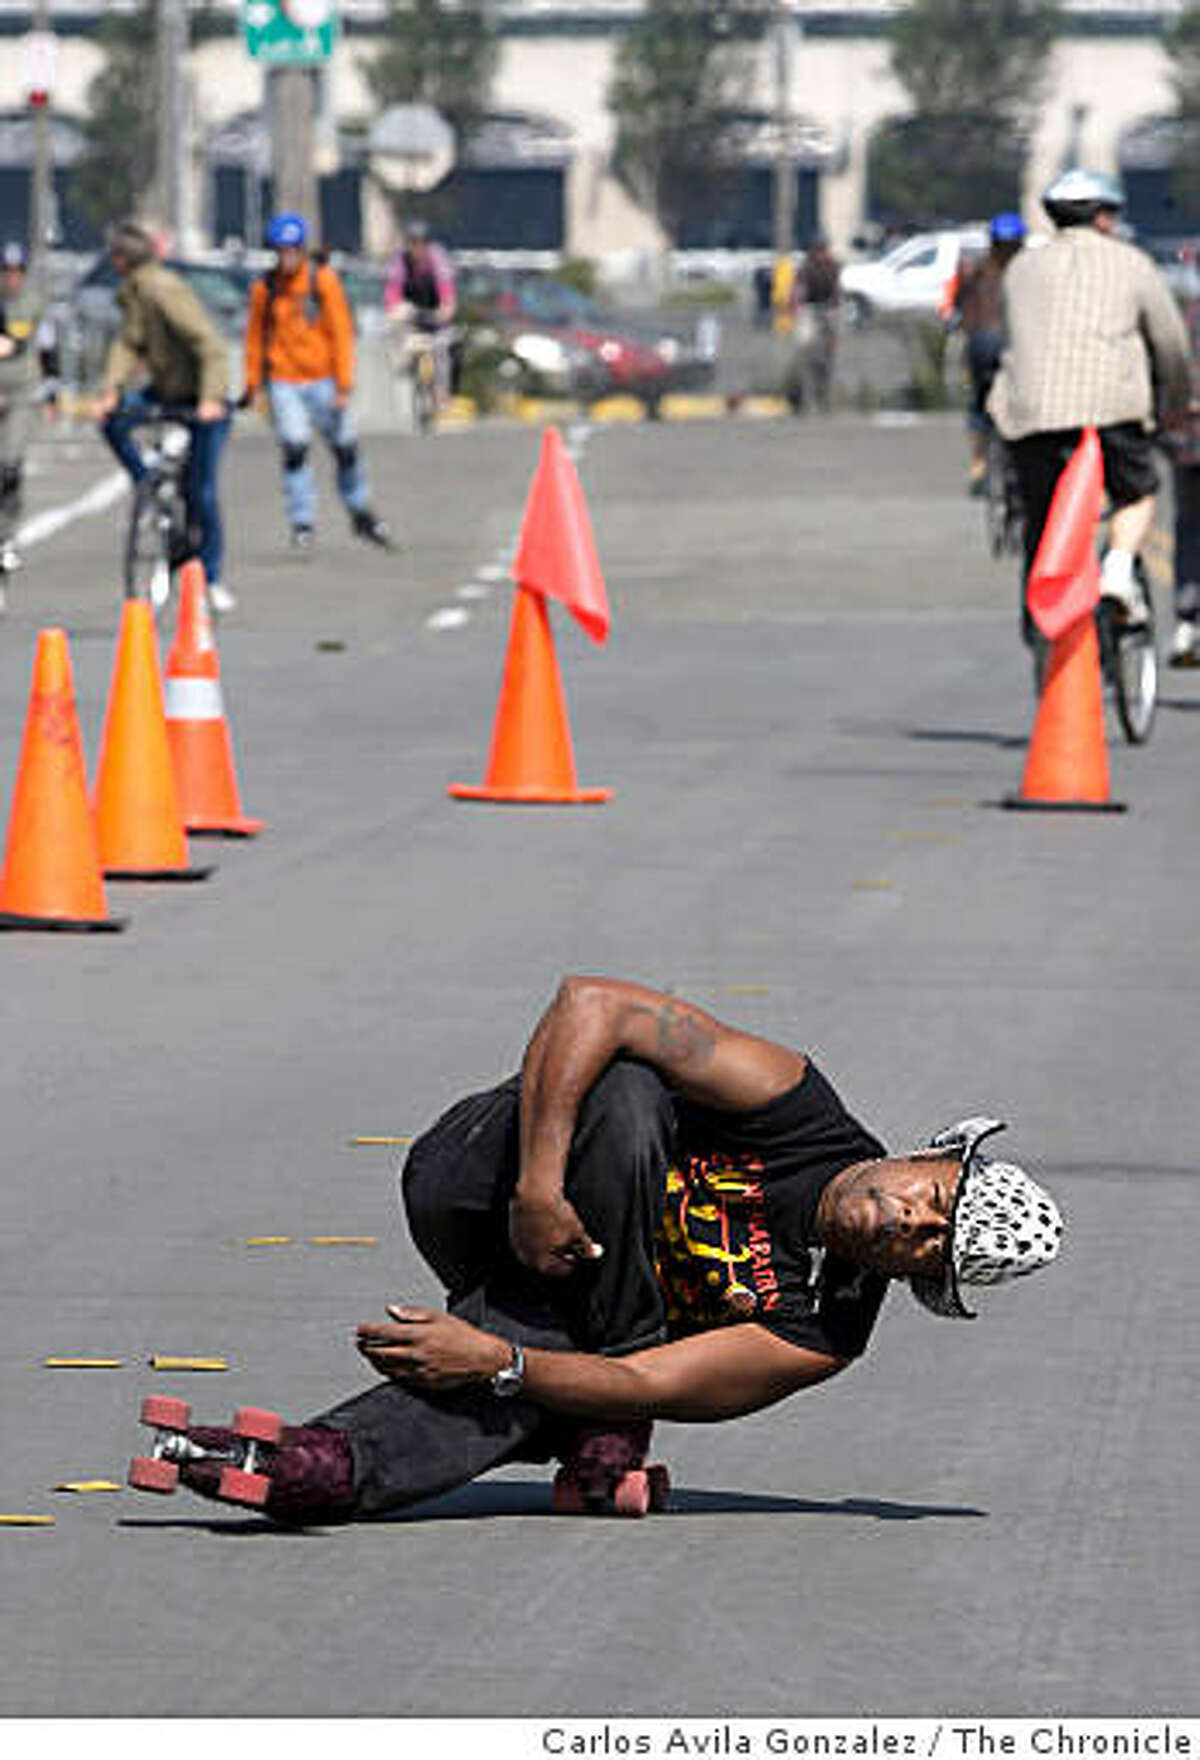 David Miles, Jr., skates on Terry A. Francois Street on Sunday, September 14, 2008, in San Francisco, Ca., during the city's Sunday Streets event. Sunday is the second and last time this year the city experiments with closing down parts of San Francisco to encourage people to get out and about. The city has partnered with more than 100 sponsors and dozens of free activities will be offered along the route.